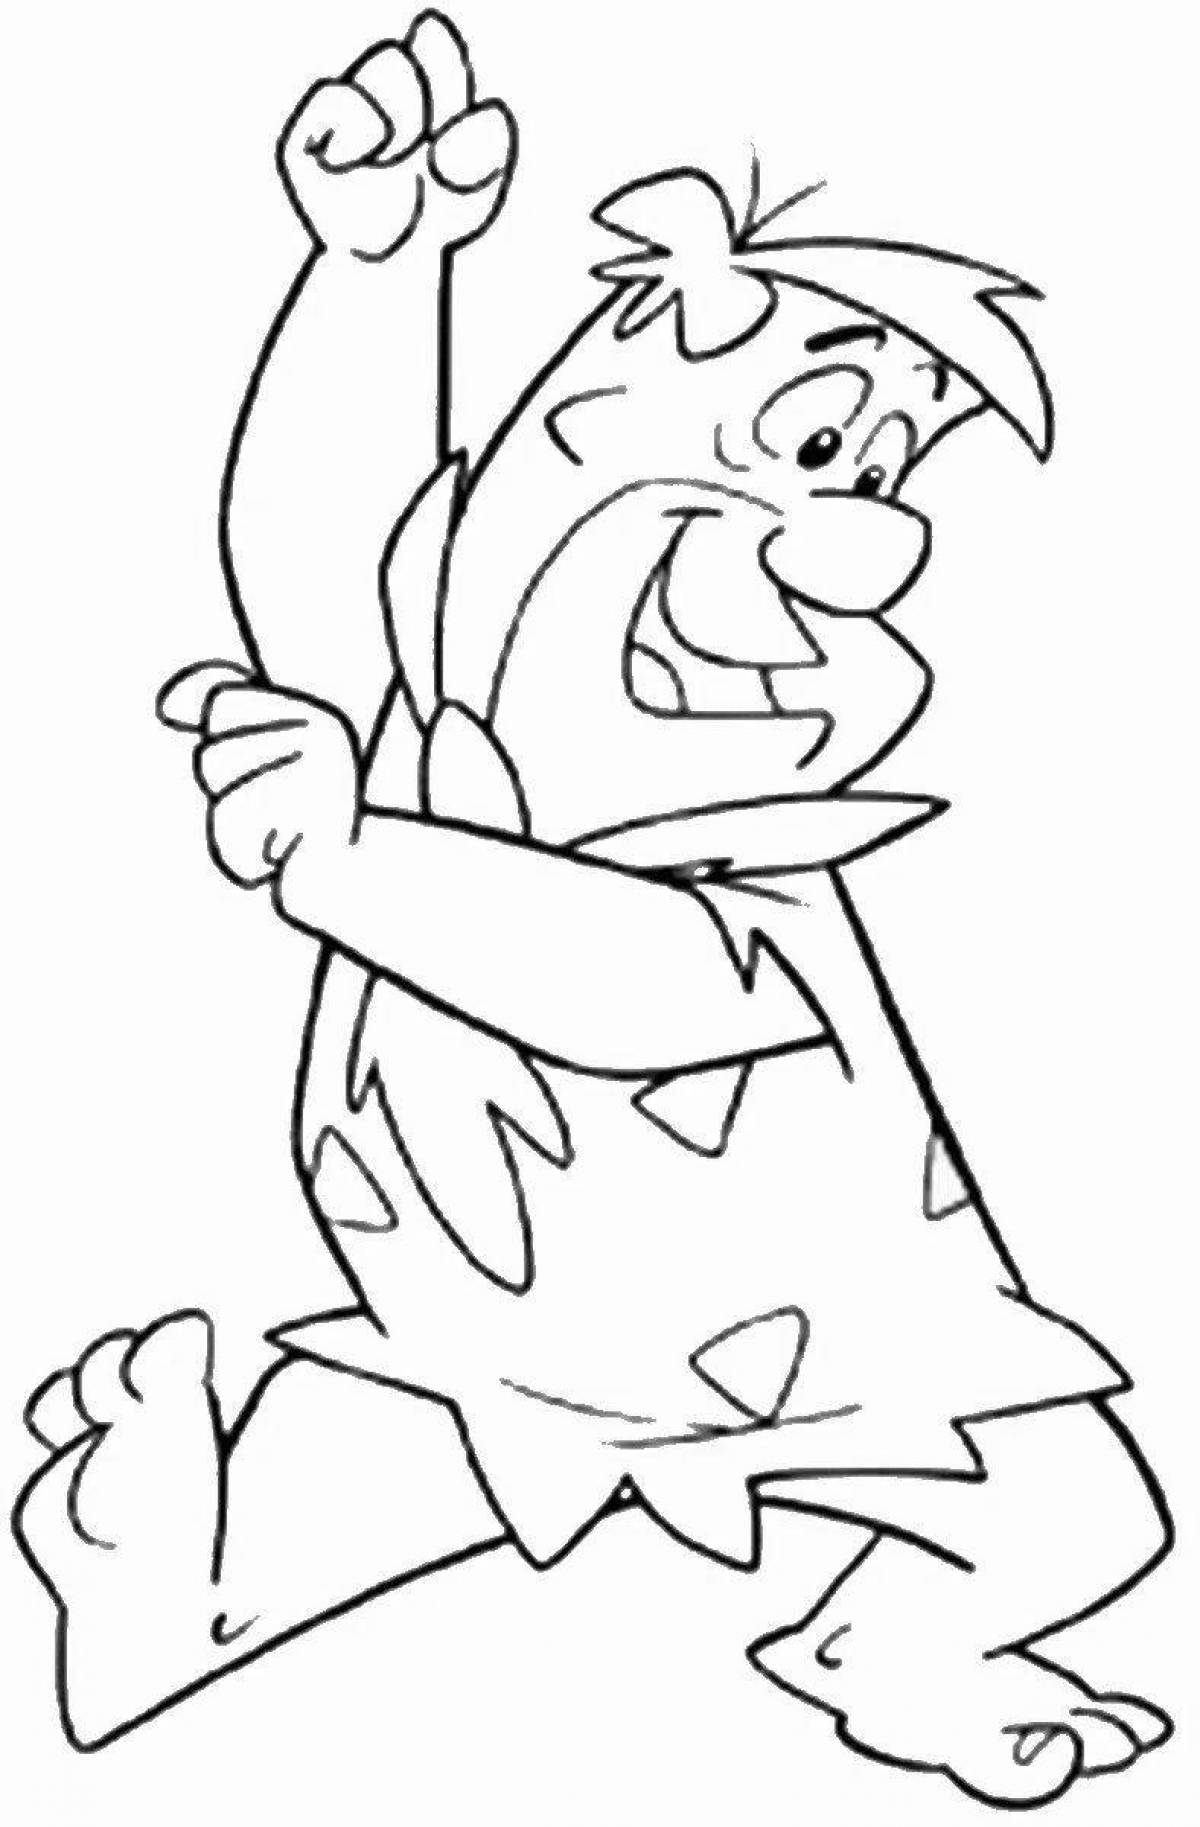 Charming fred flintstone coloring page